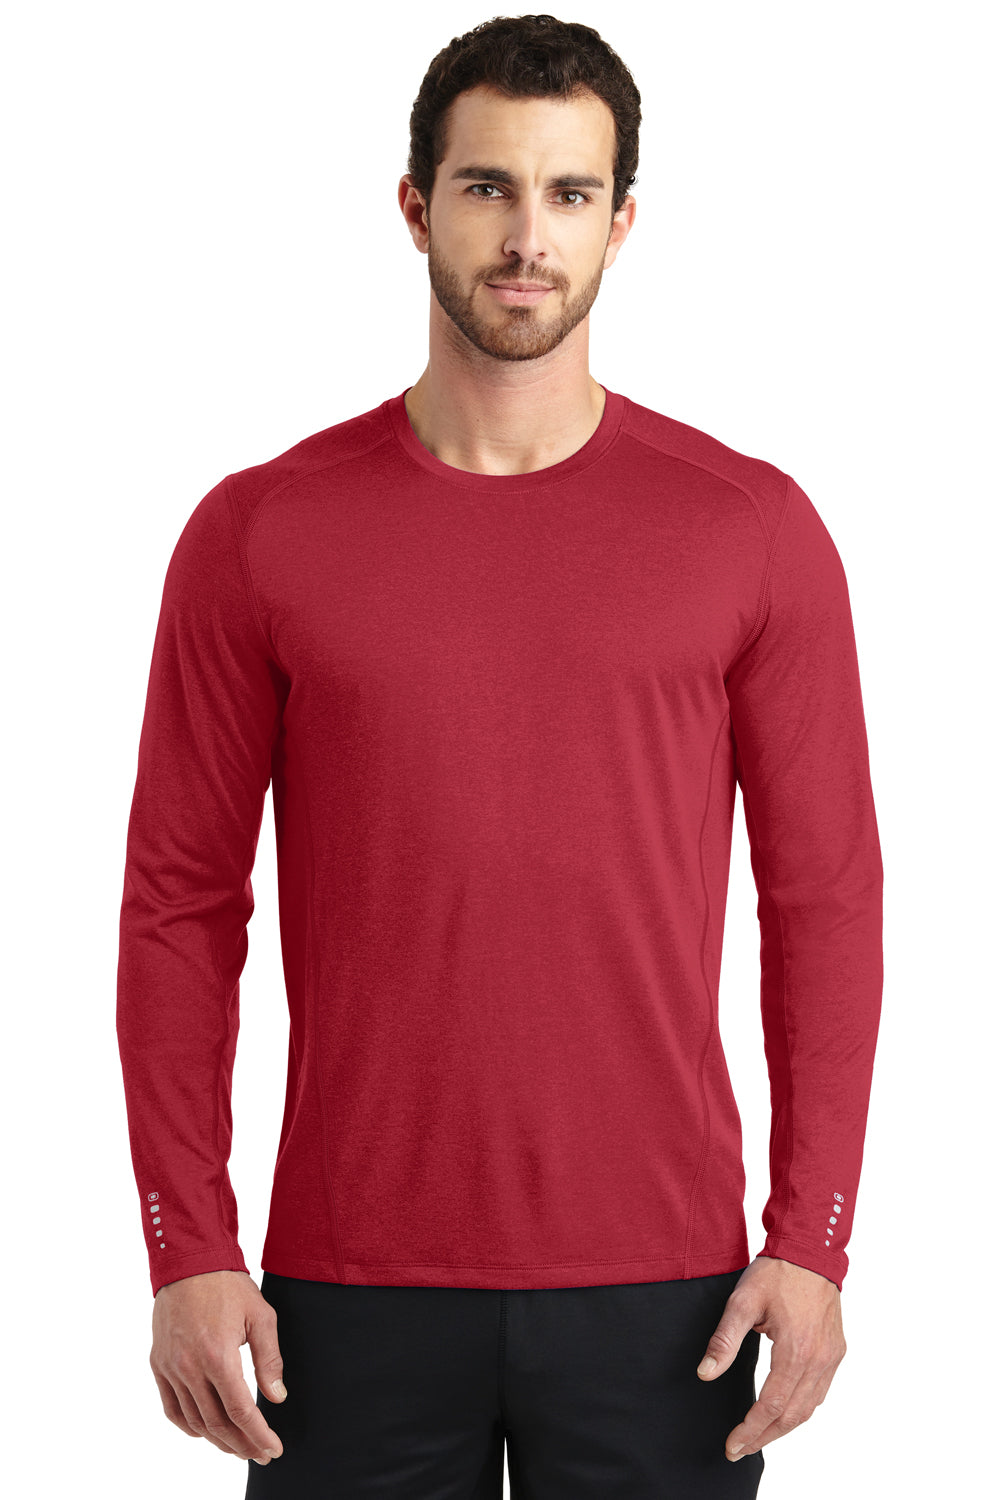 Ogio OE321 Mens Endurance Pulse Jersey Moisture Wicking Long Sleeve Crewneck T-Shirt Red Front